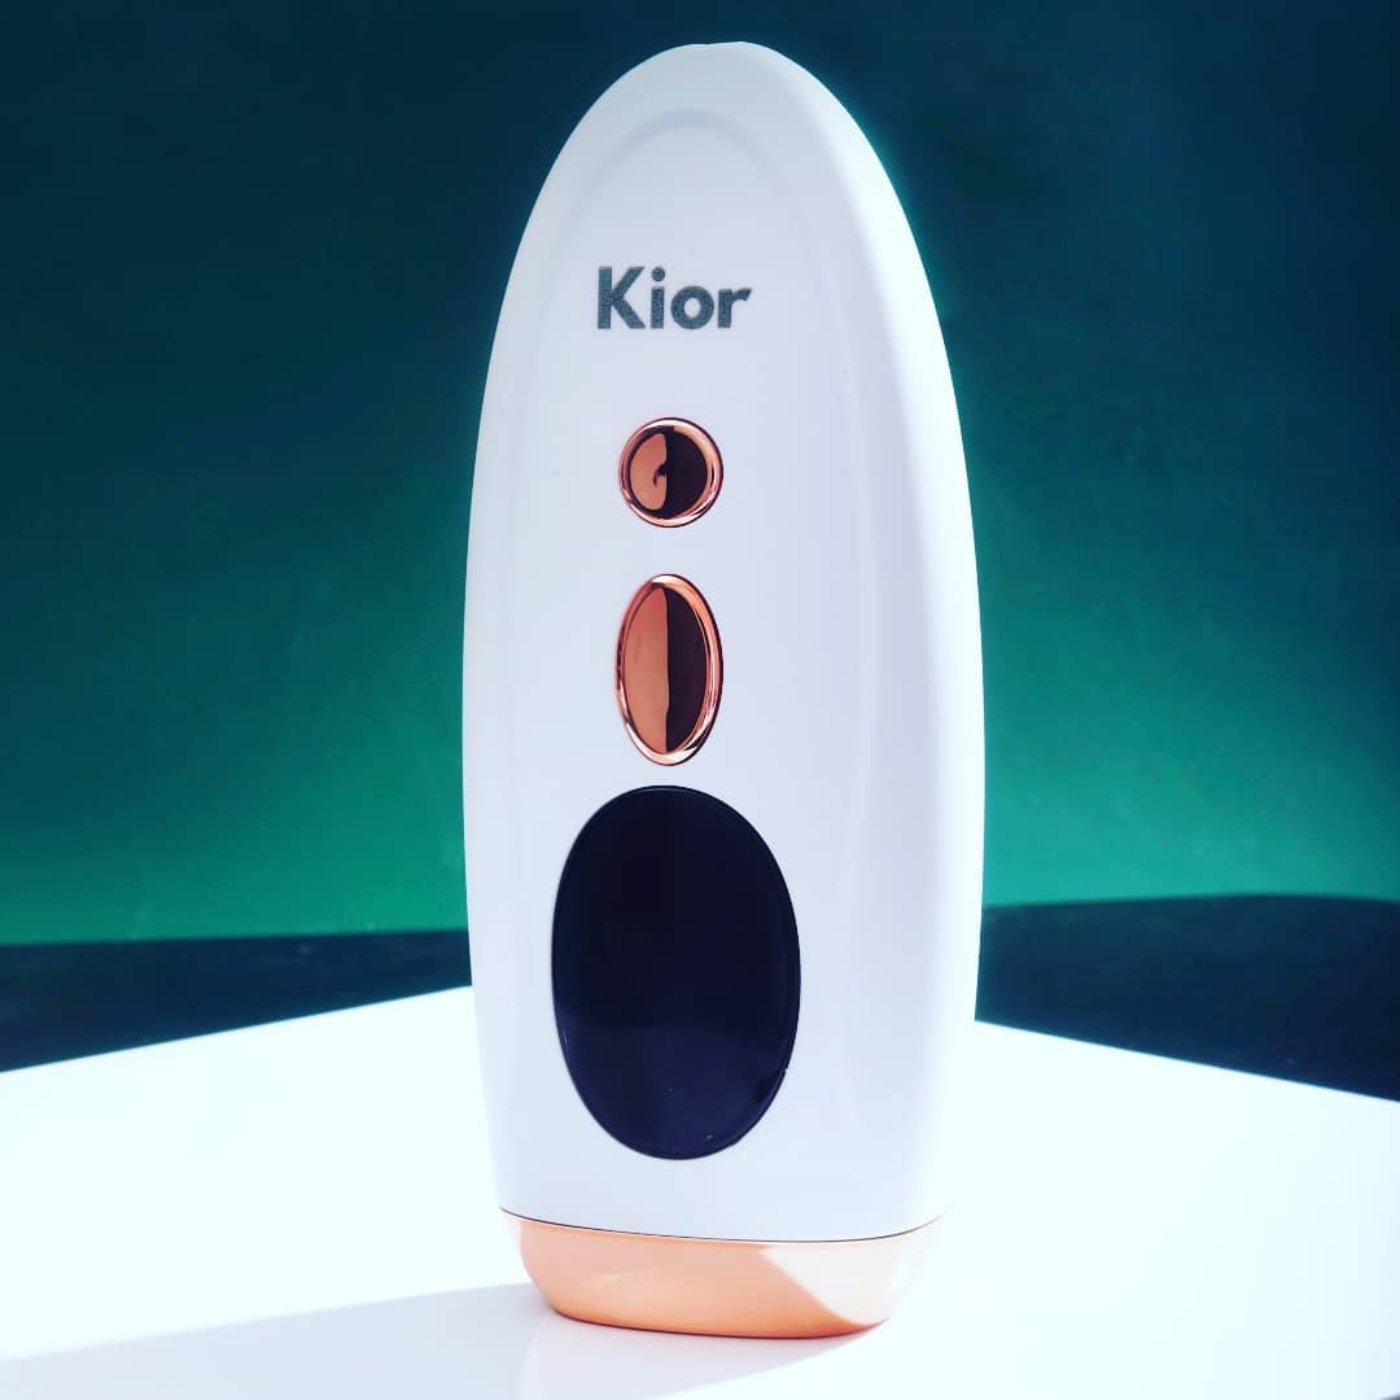 At Home Laser Hair Removal Device by Kior™